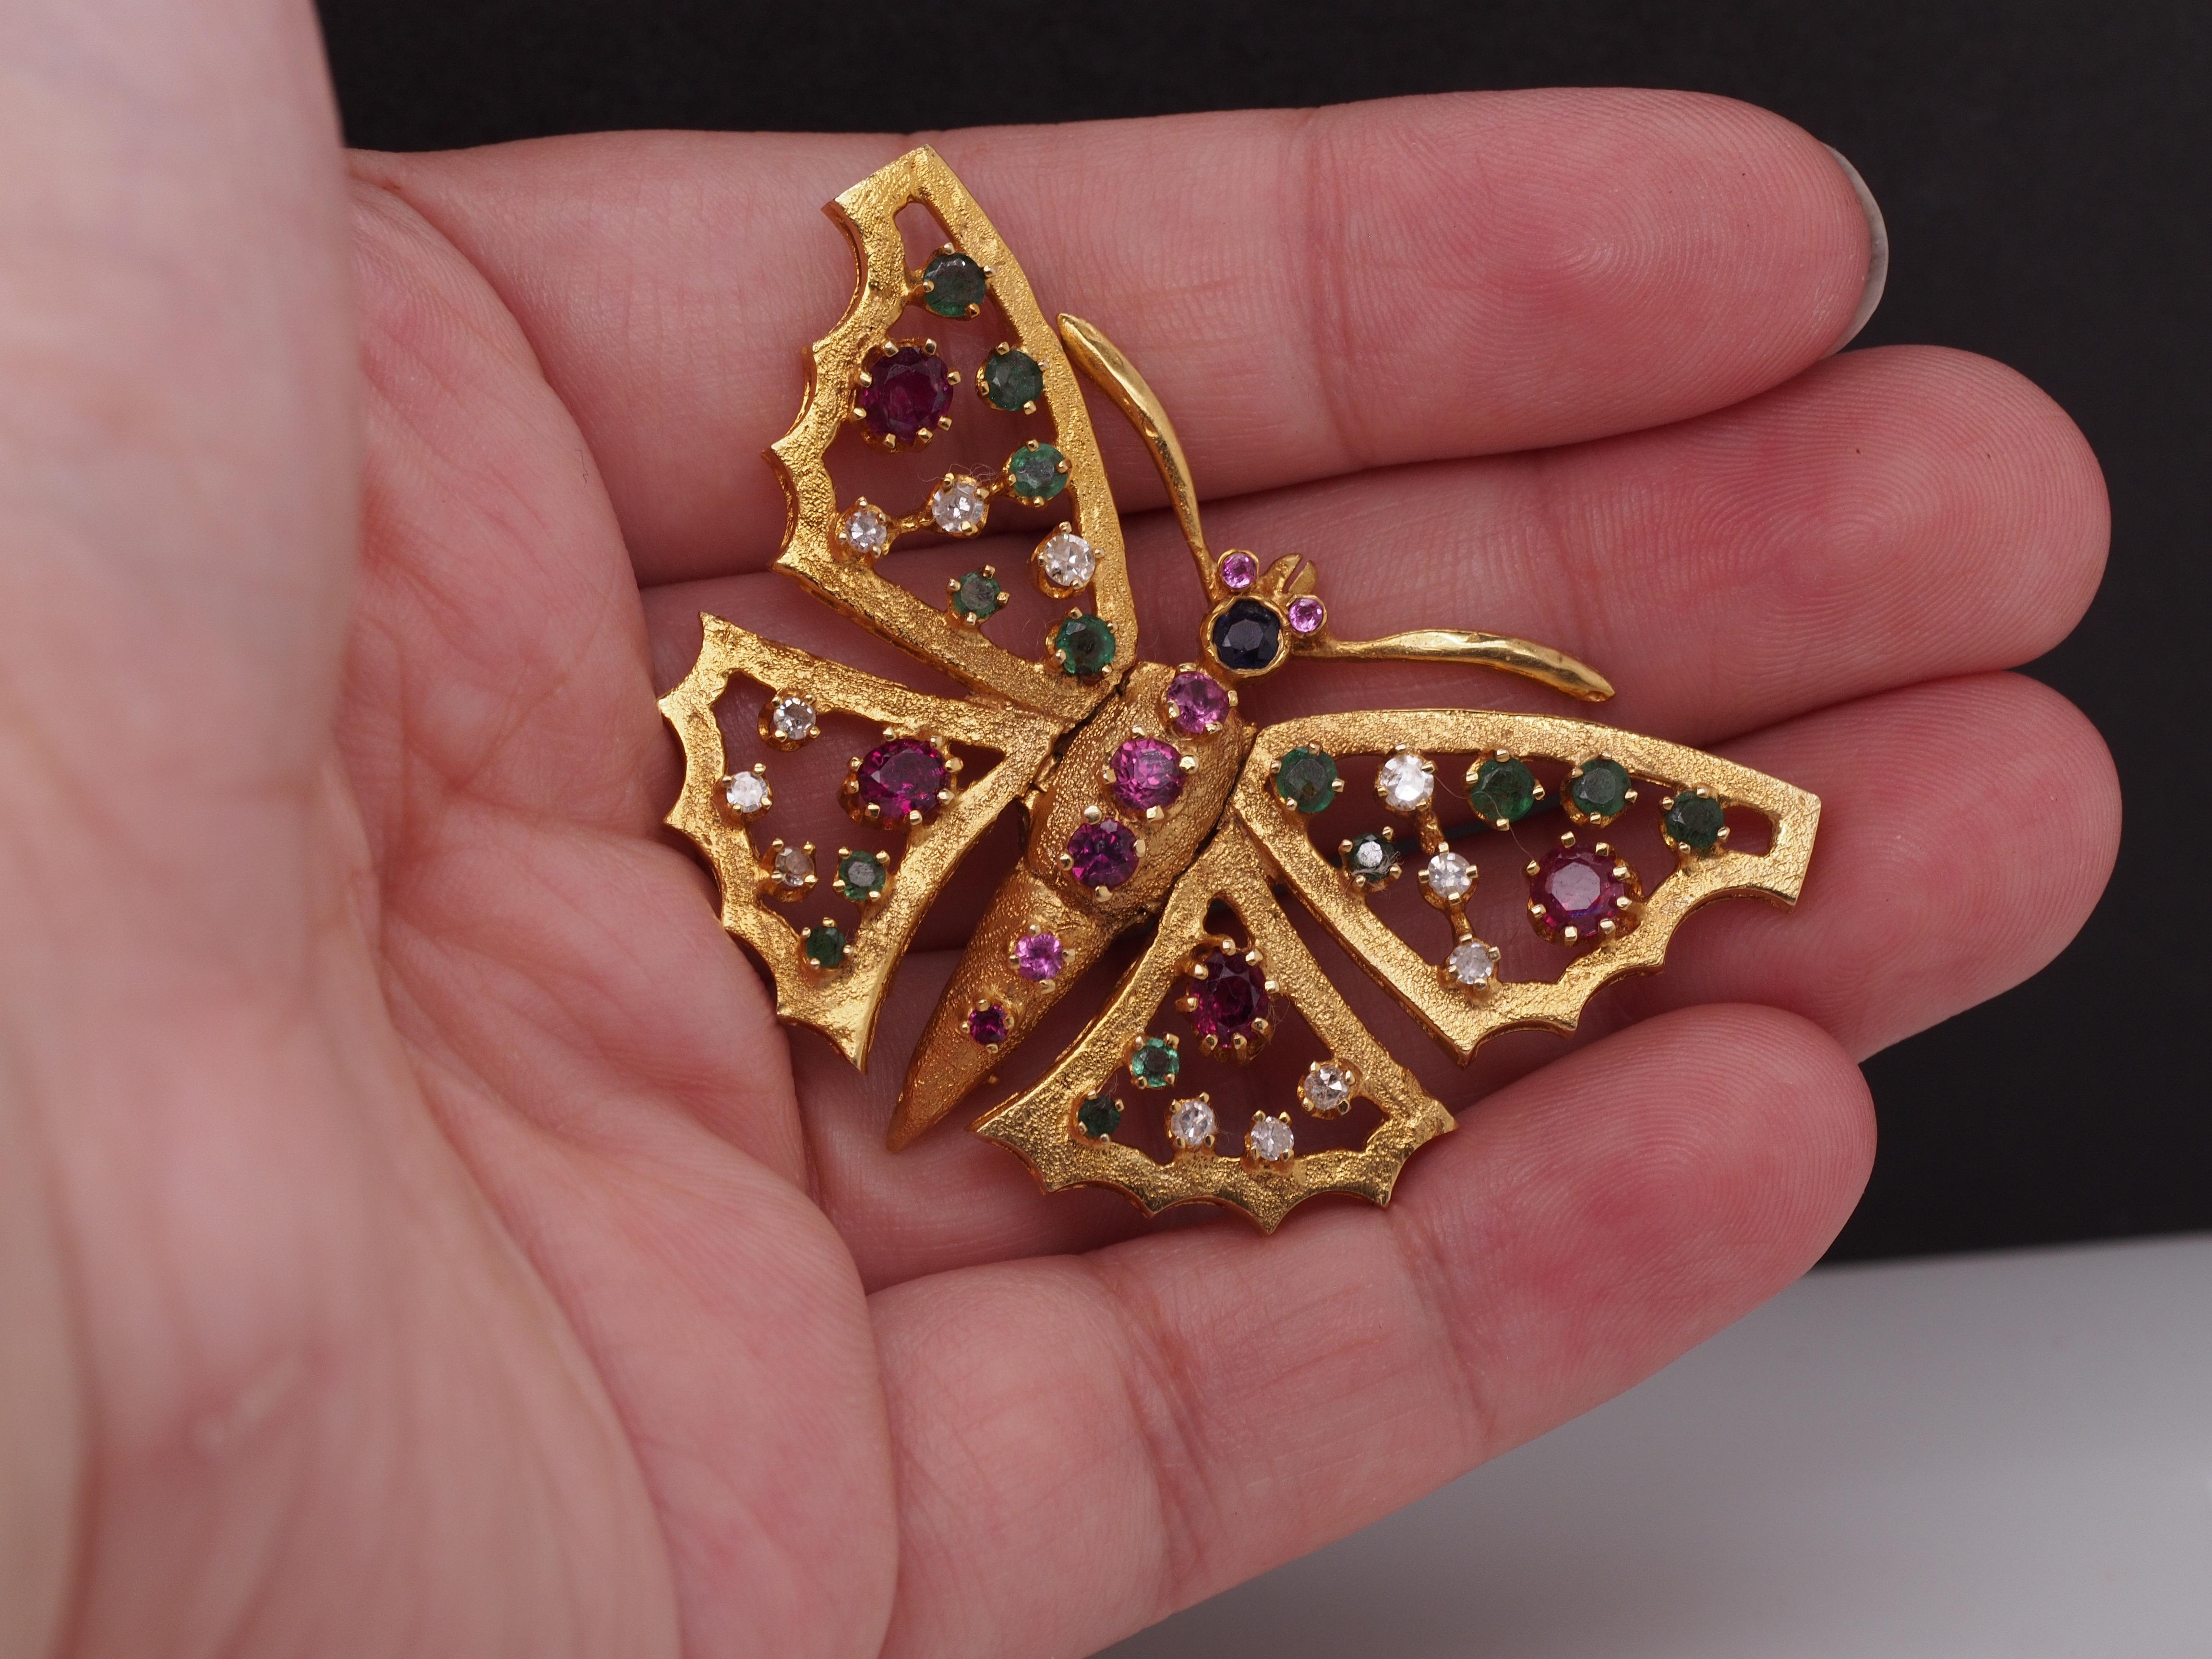 14K Yellow Gold Butterfly Brooch with Hinged Wings and Diamonds, Rubies, Emerald For Sale 4